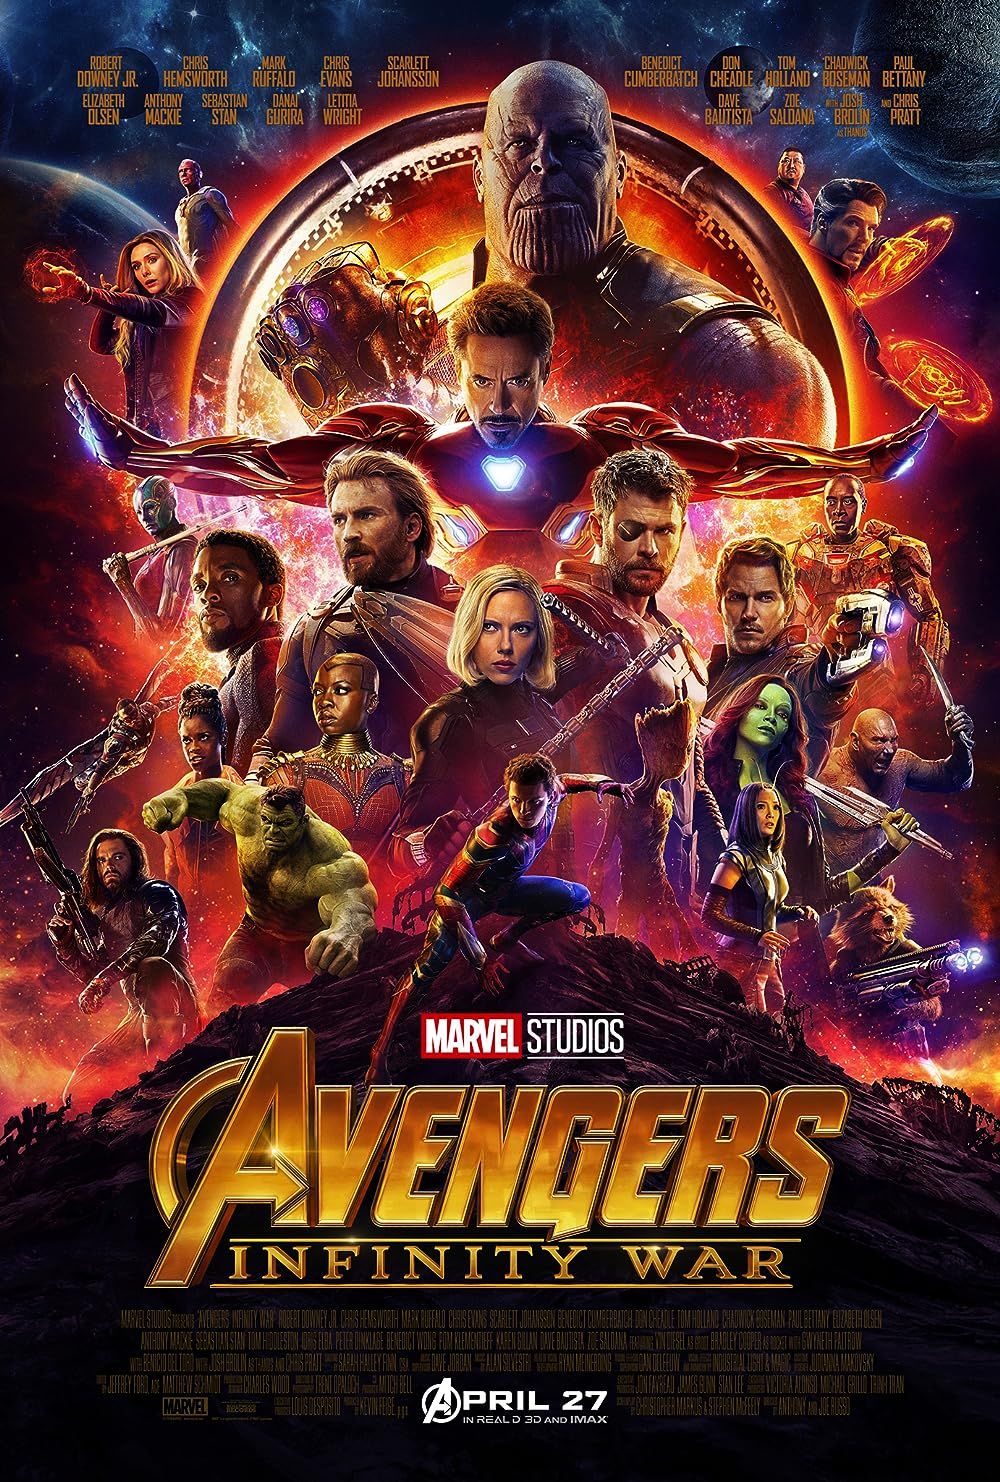 Avengers Infinity War cast on movie poster